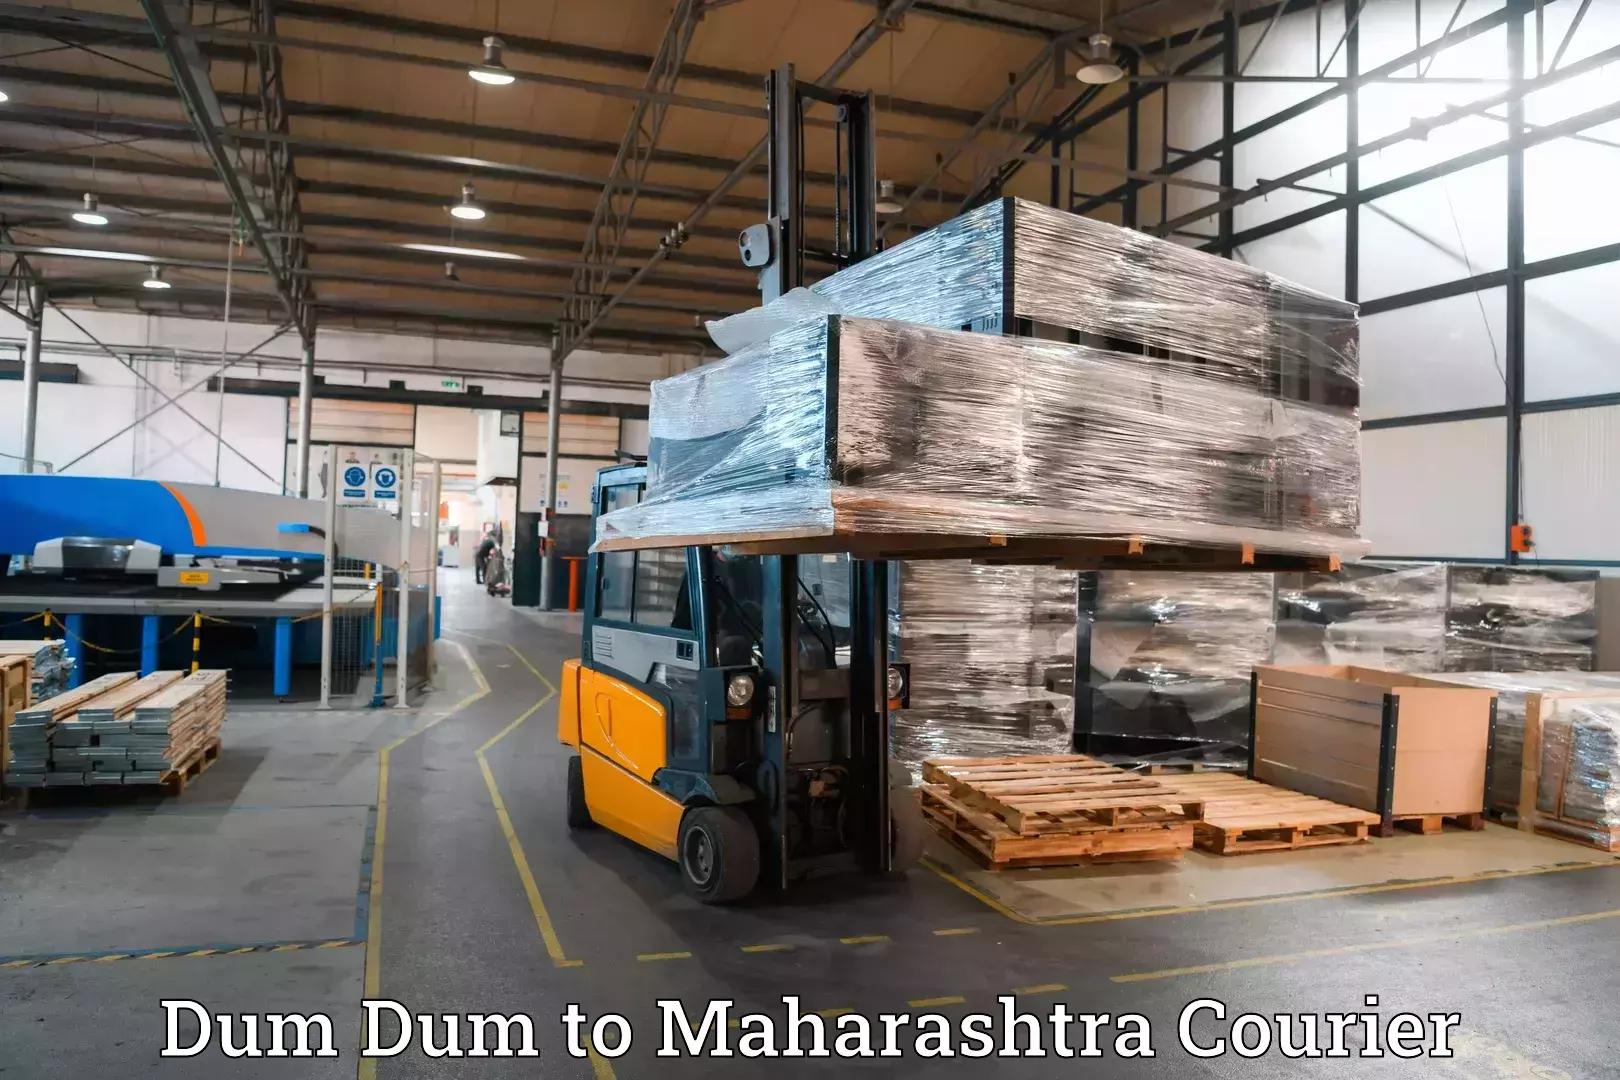 Baggage shipping experience in Dum Dum to Mahim